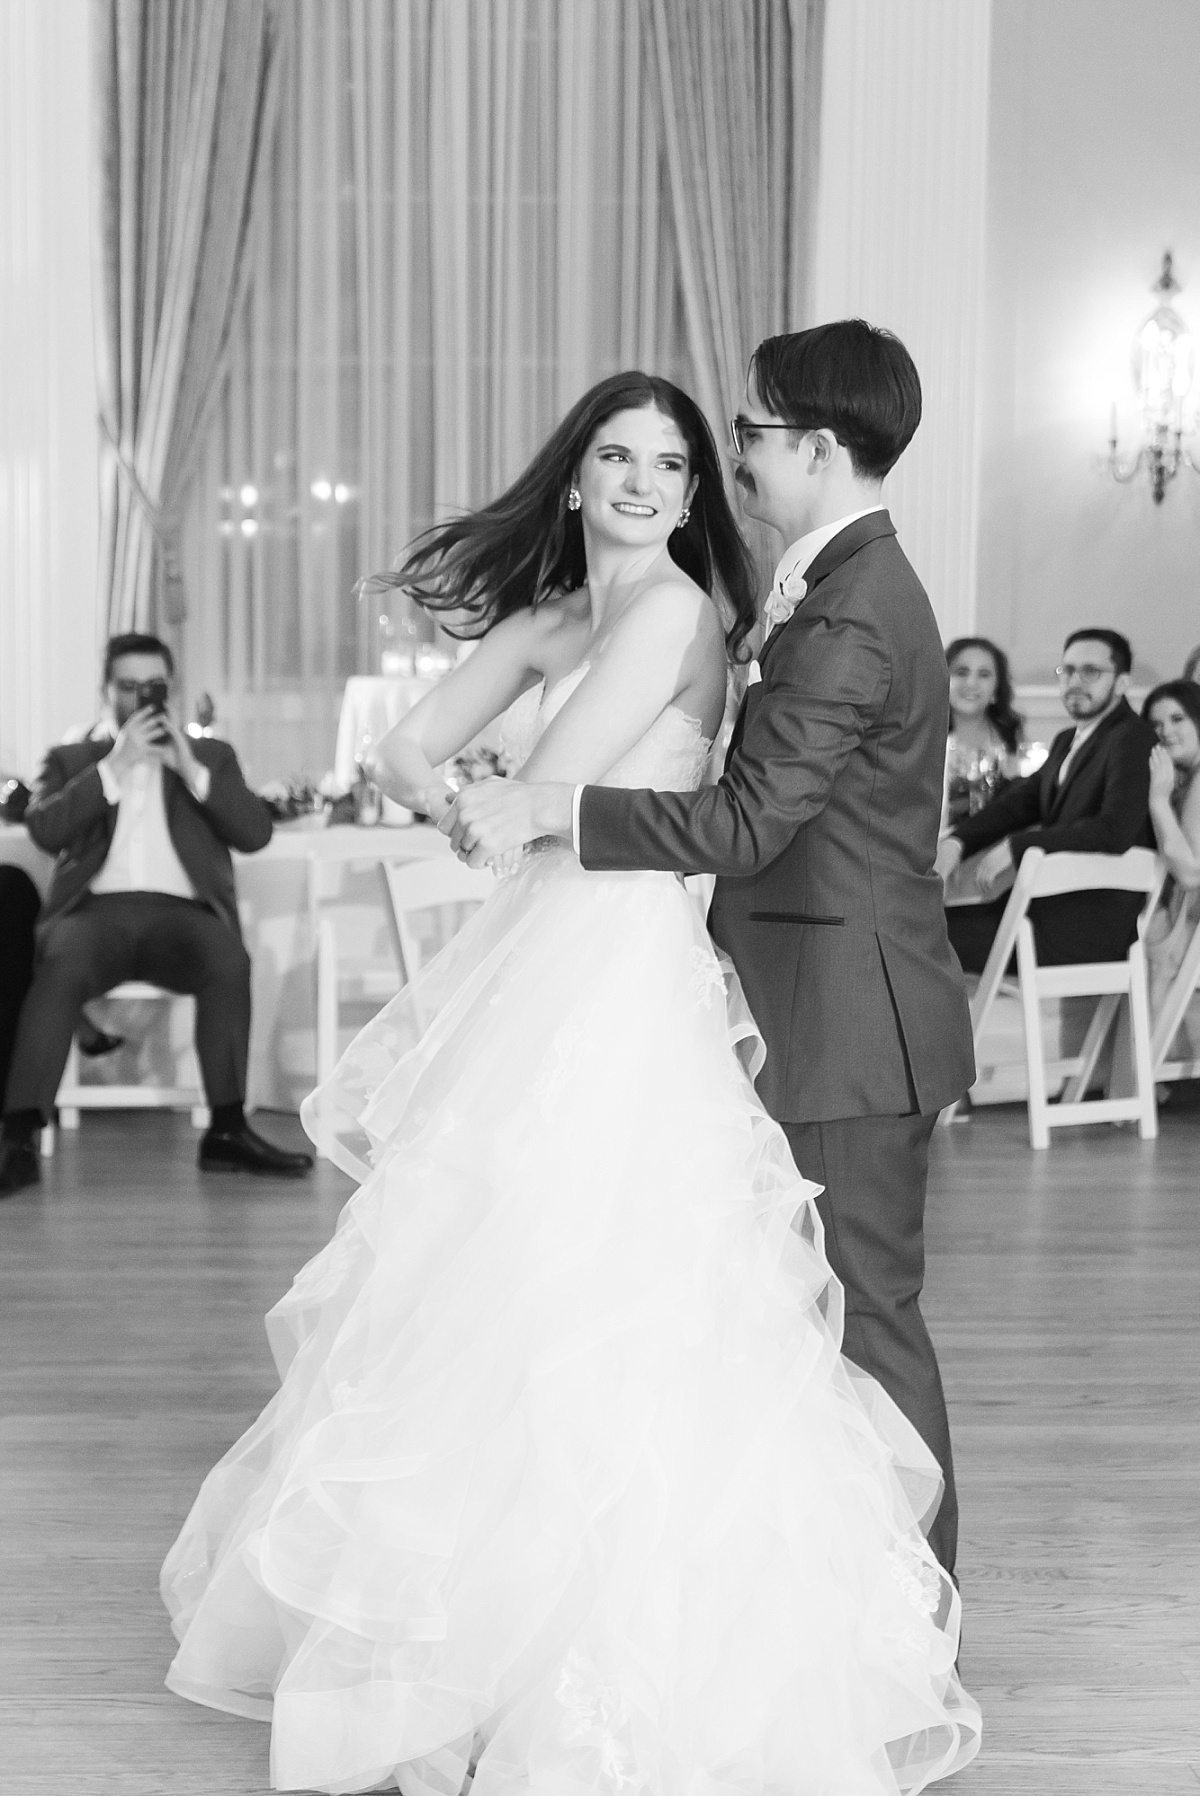 Black and white wedding photograph of a newlywed couple dancing by Paige Vaughn Photography.